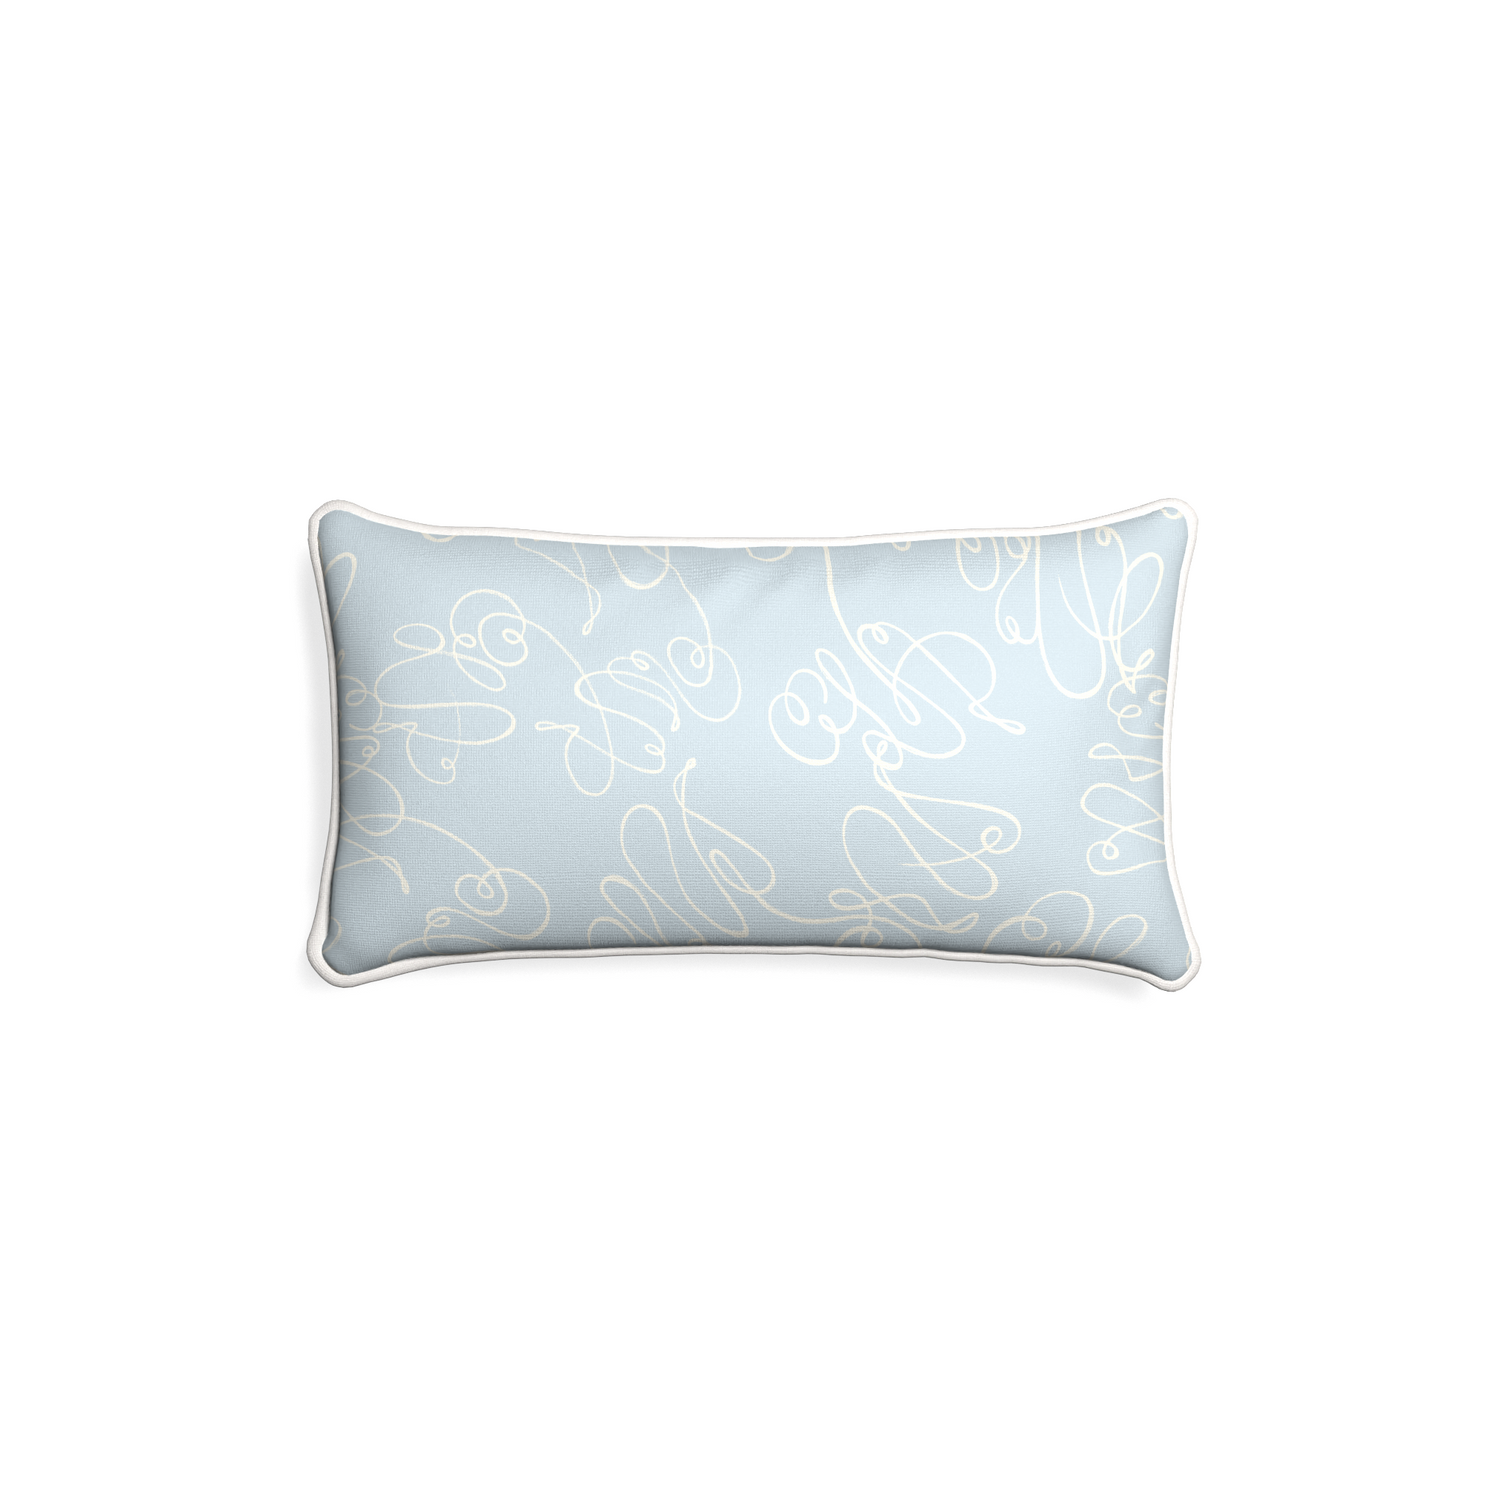 Petite-lumbar mirabella custom powder blue abstractpillow with snow piping on white background